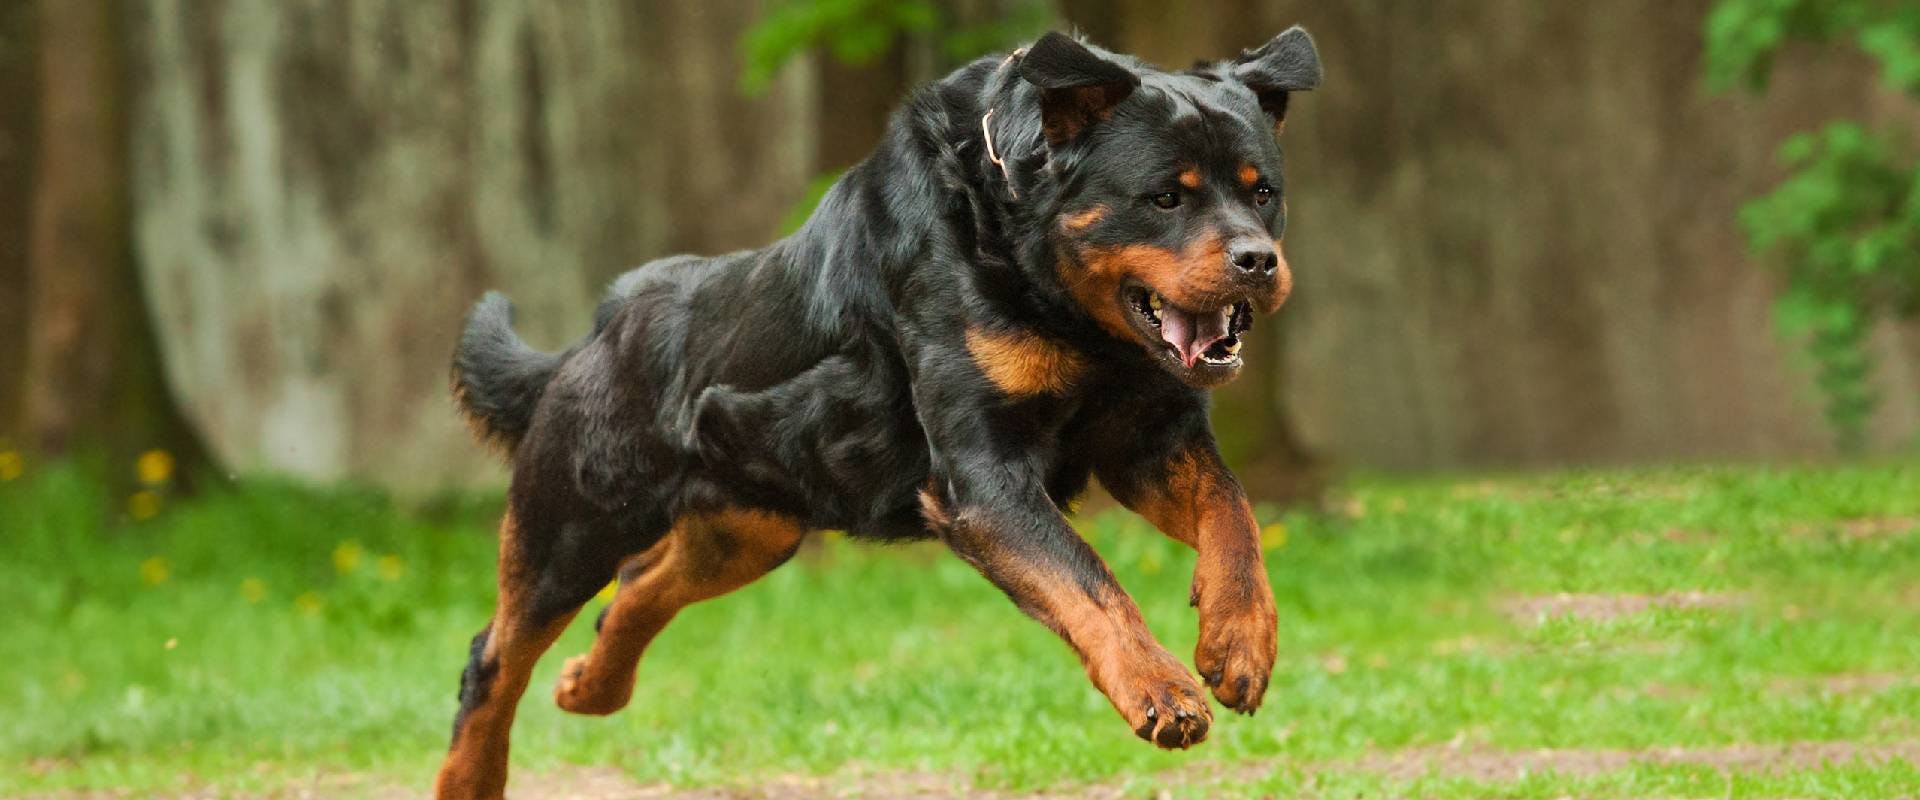 at what age should i start training my rottweiler puppy